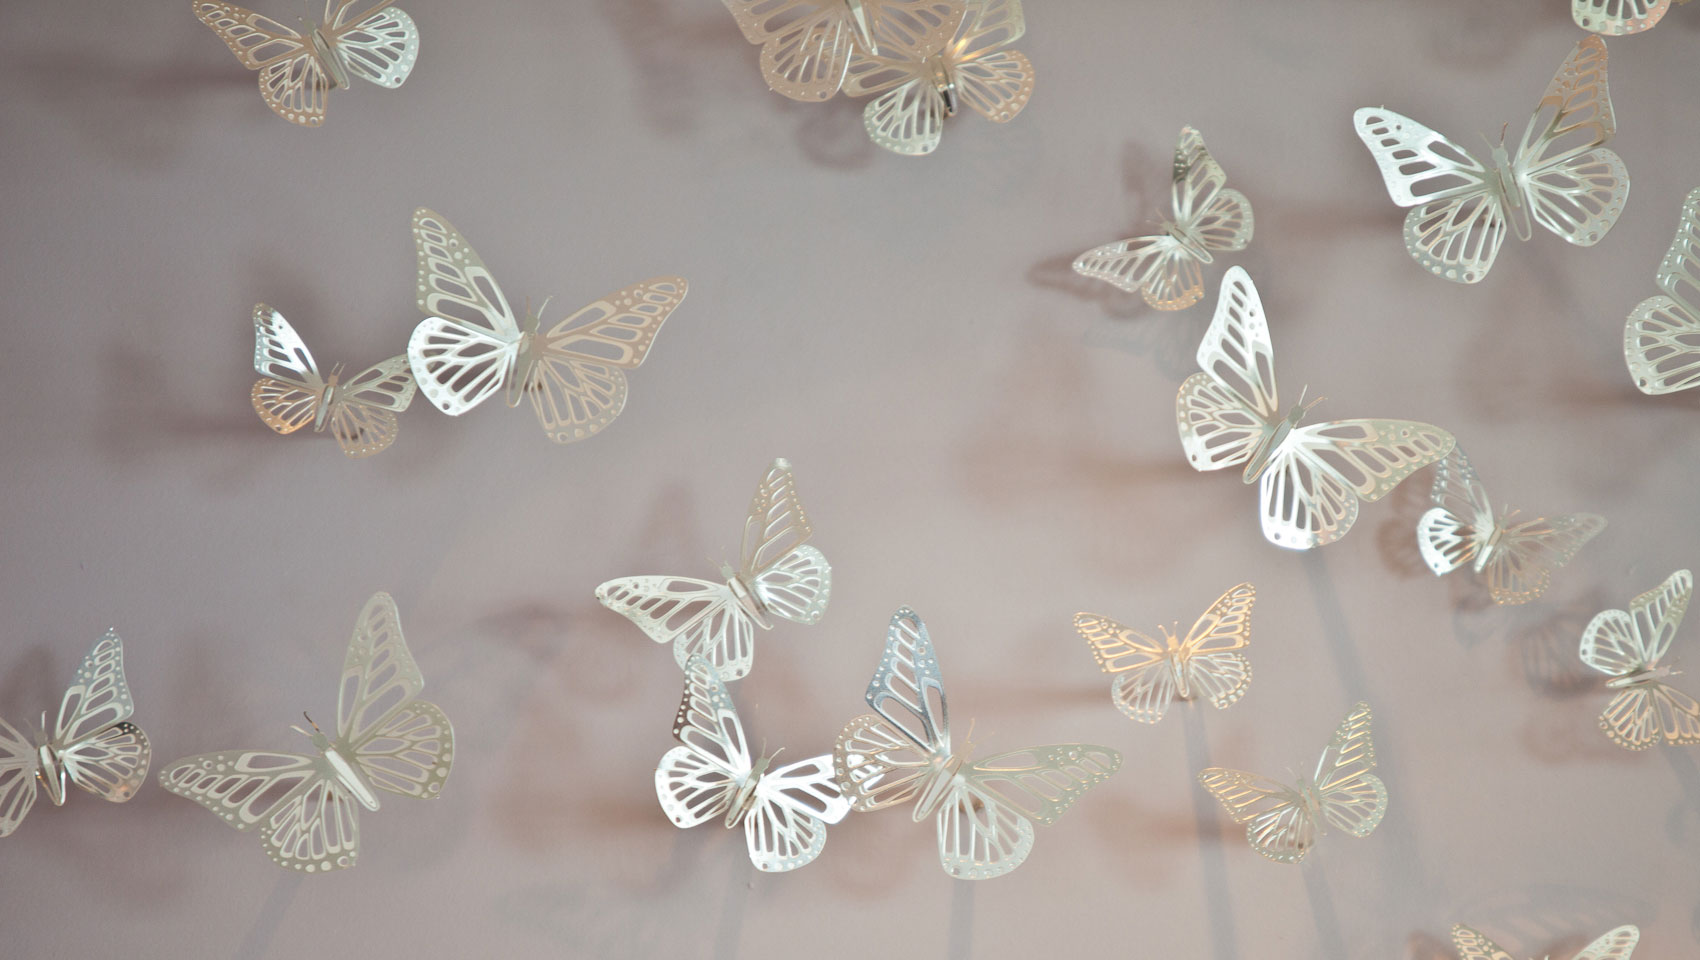 Kimpton Surfcomber Hotel butterfly wall